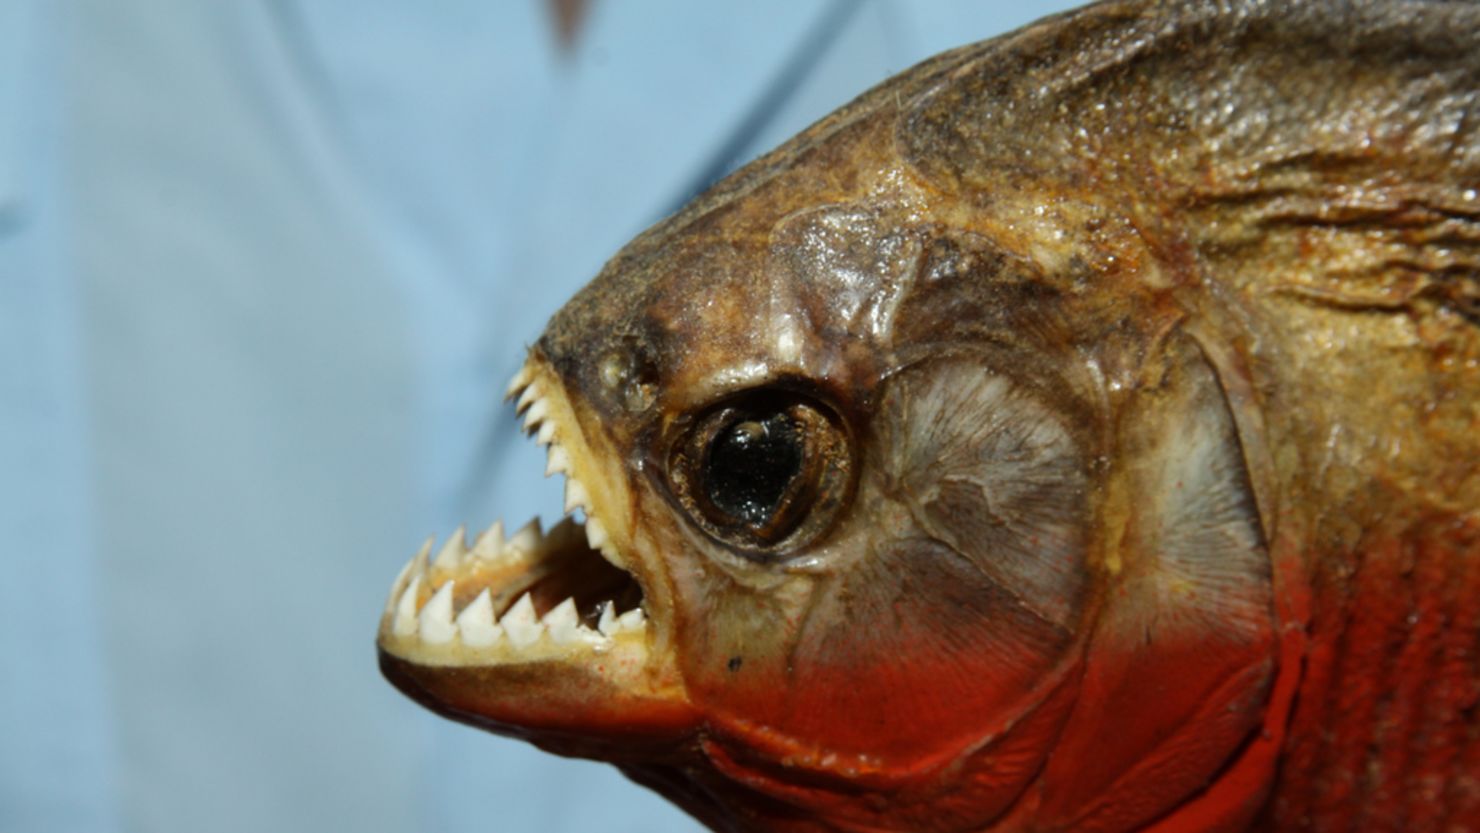 Joel Rakower pleaded guilty Wednesday to smuggling nearly 40,000 piranhas into the United States.